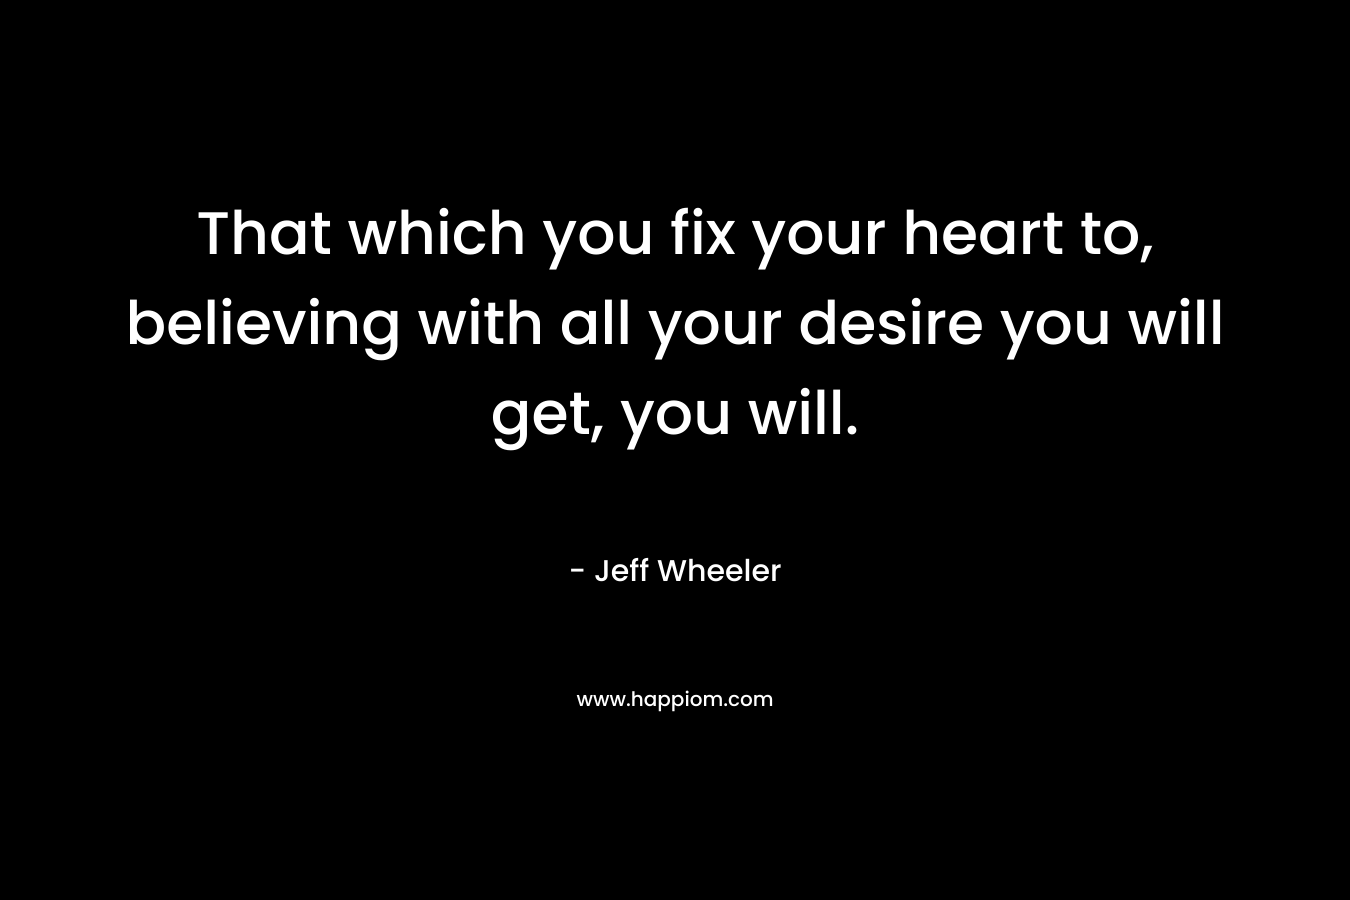 That which you fix your heart to, believing with all your desire you will get, you will. – Jeff Wheeler